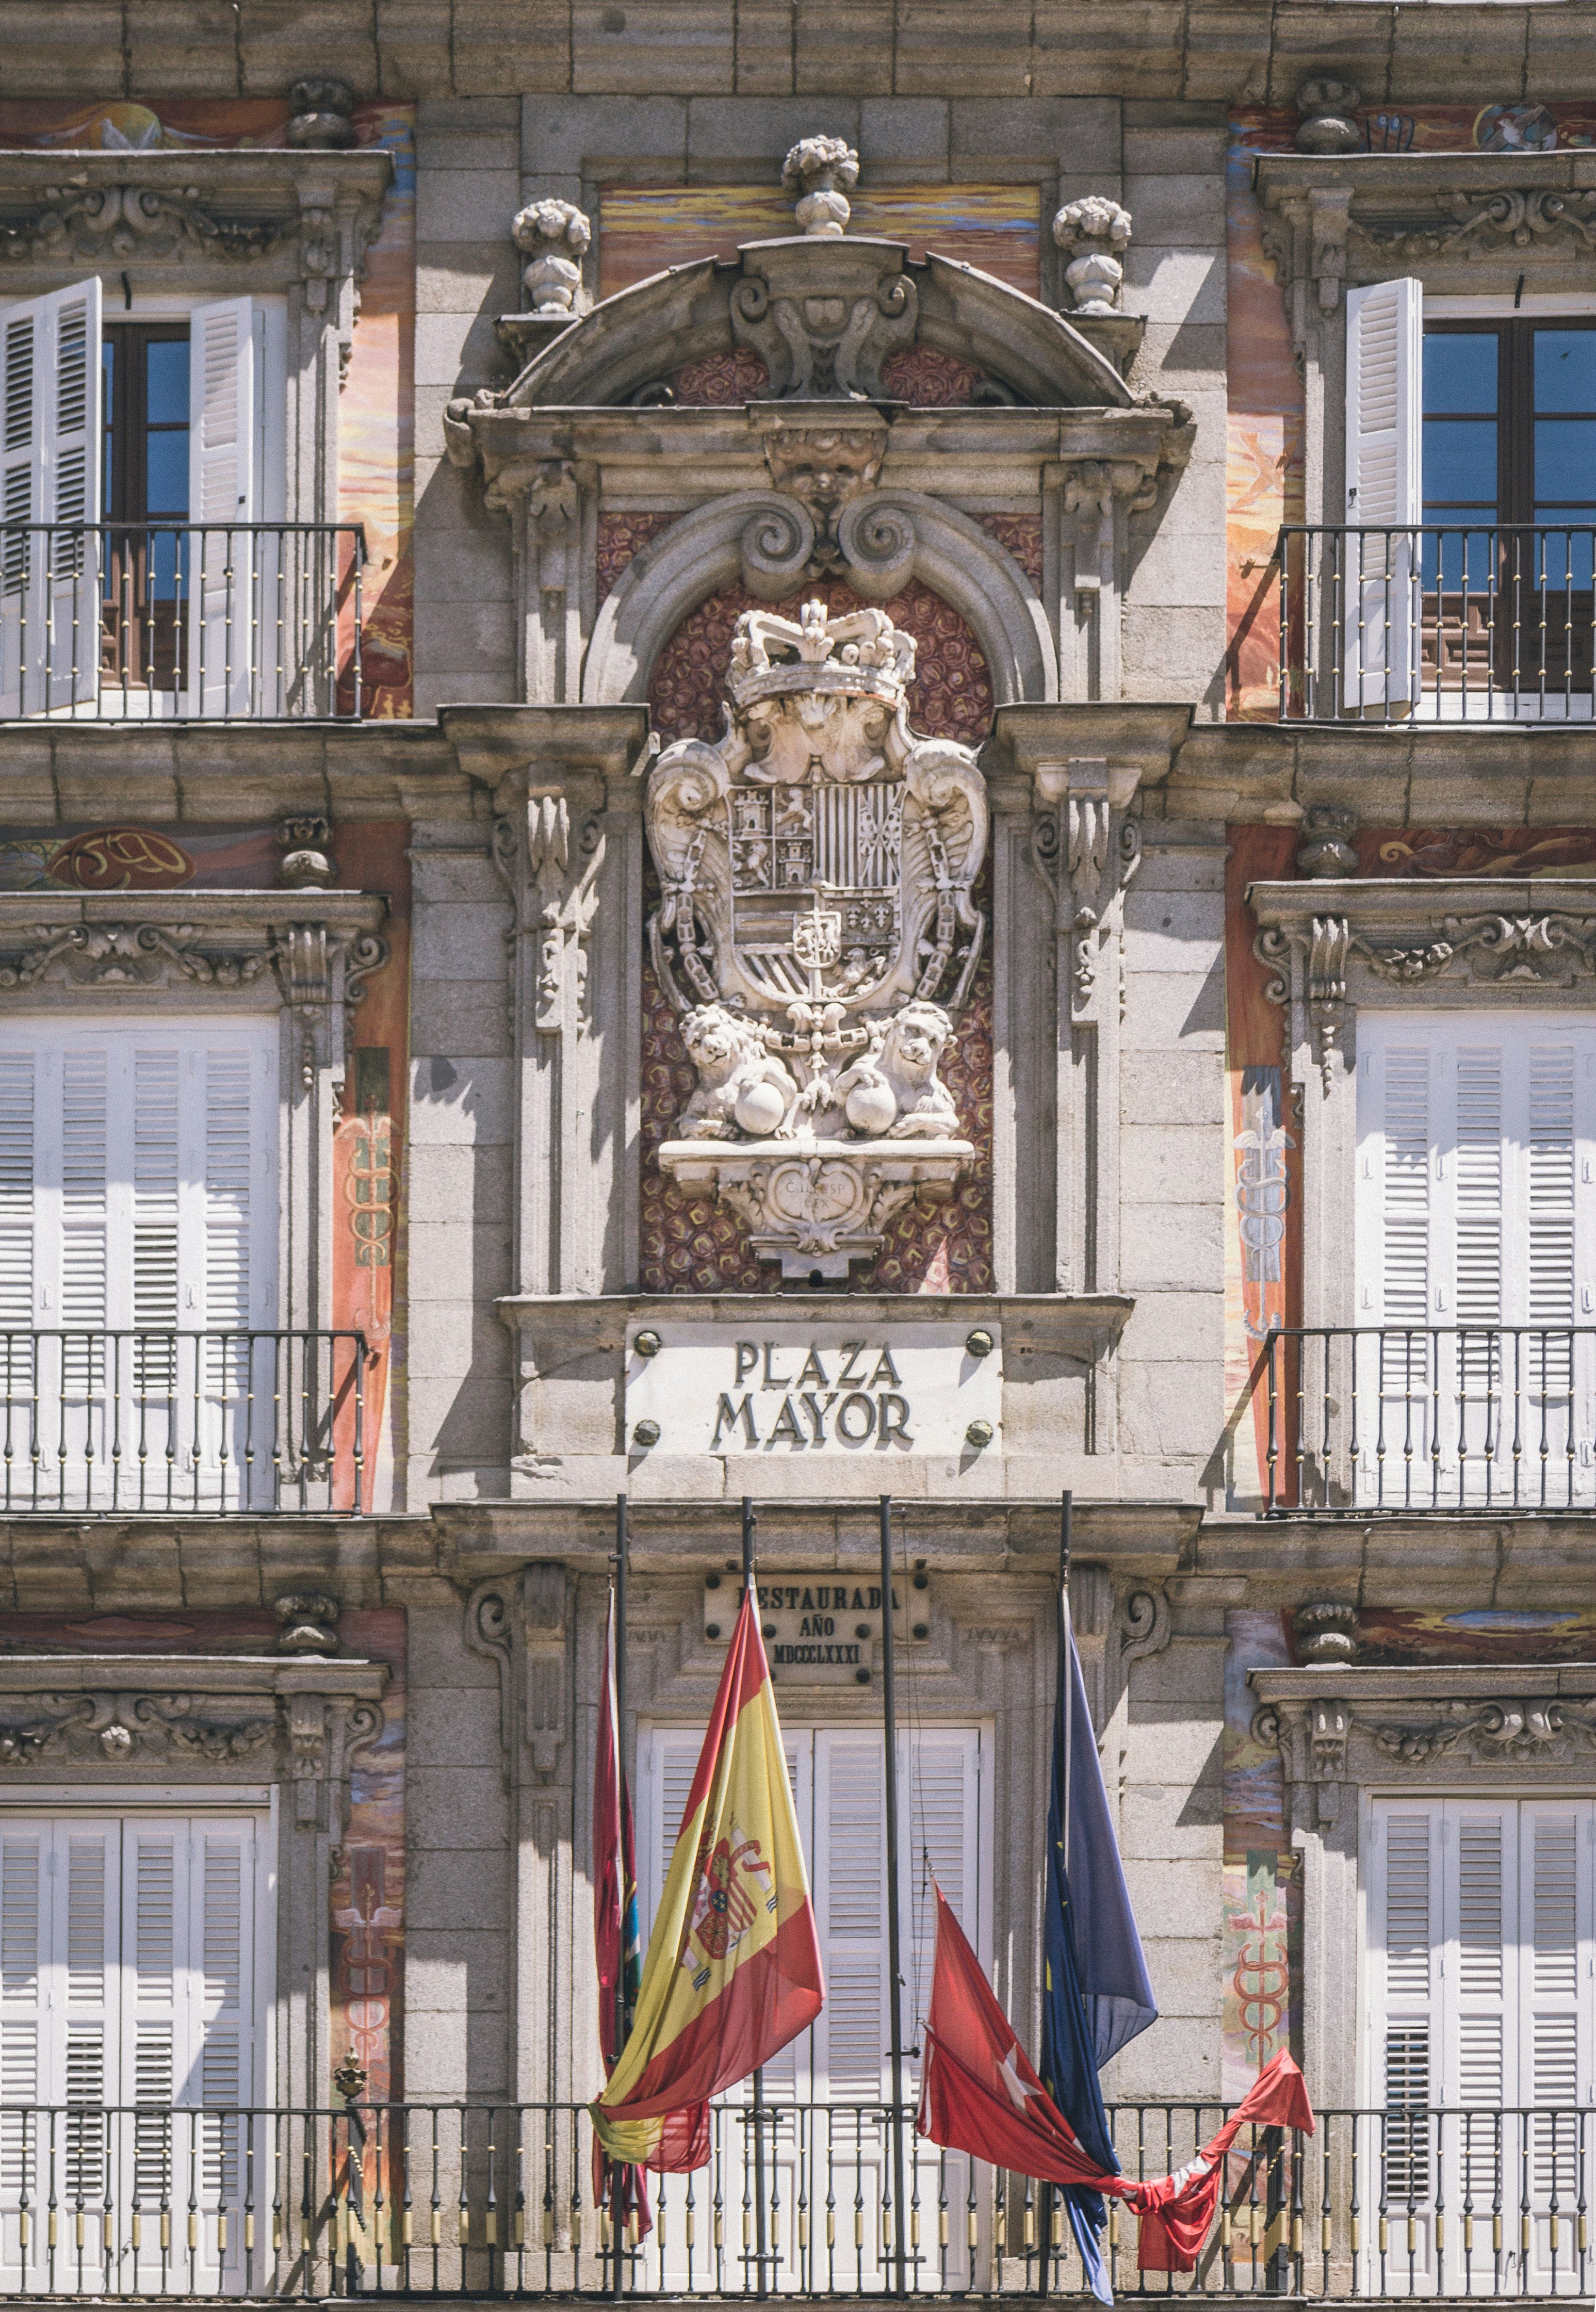 Close up of the Spanish Coat of Arms at Plaza Mayor in Madrid